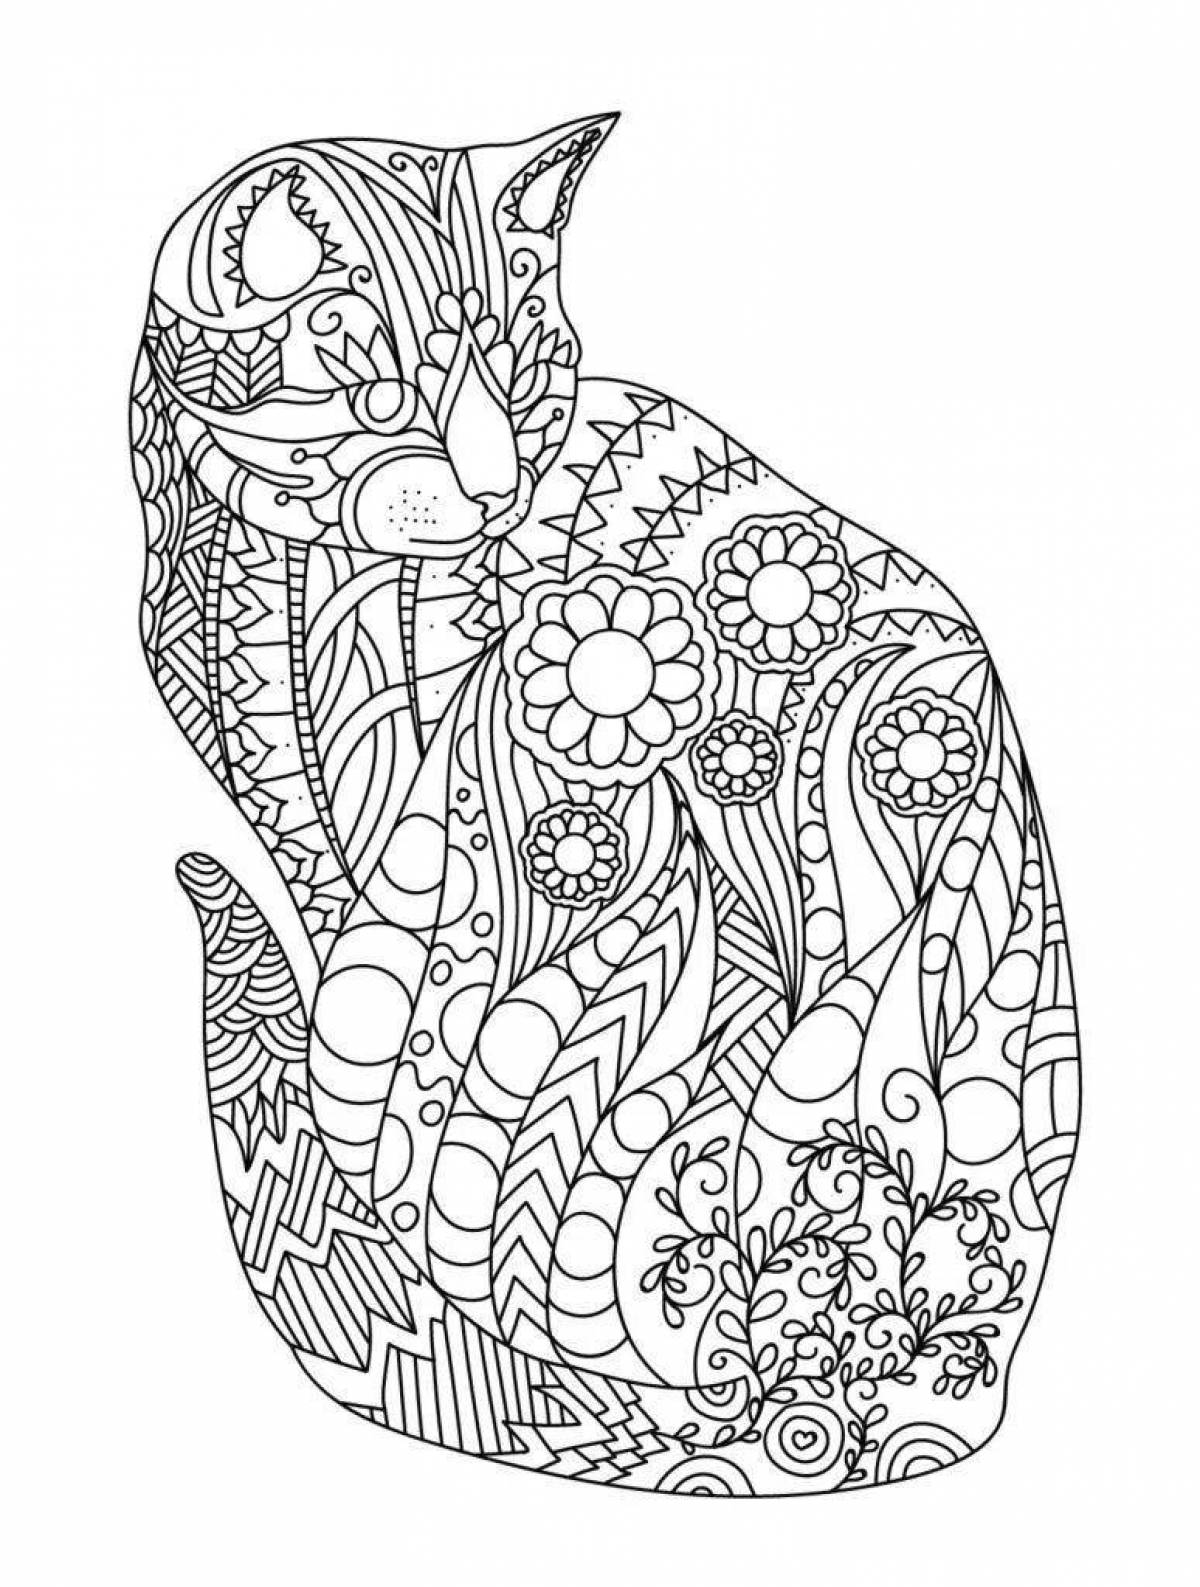 Harmonious coloring relaxation for children